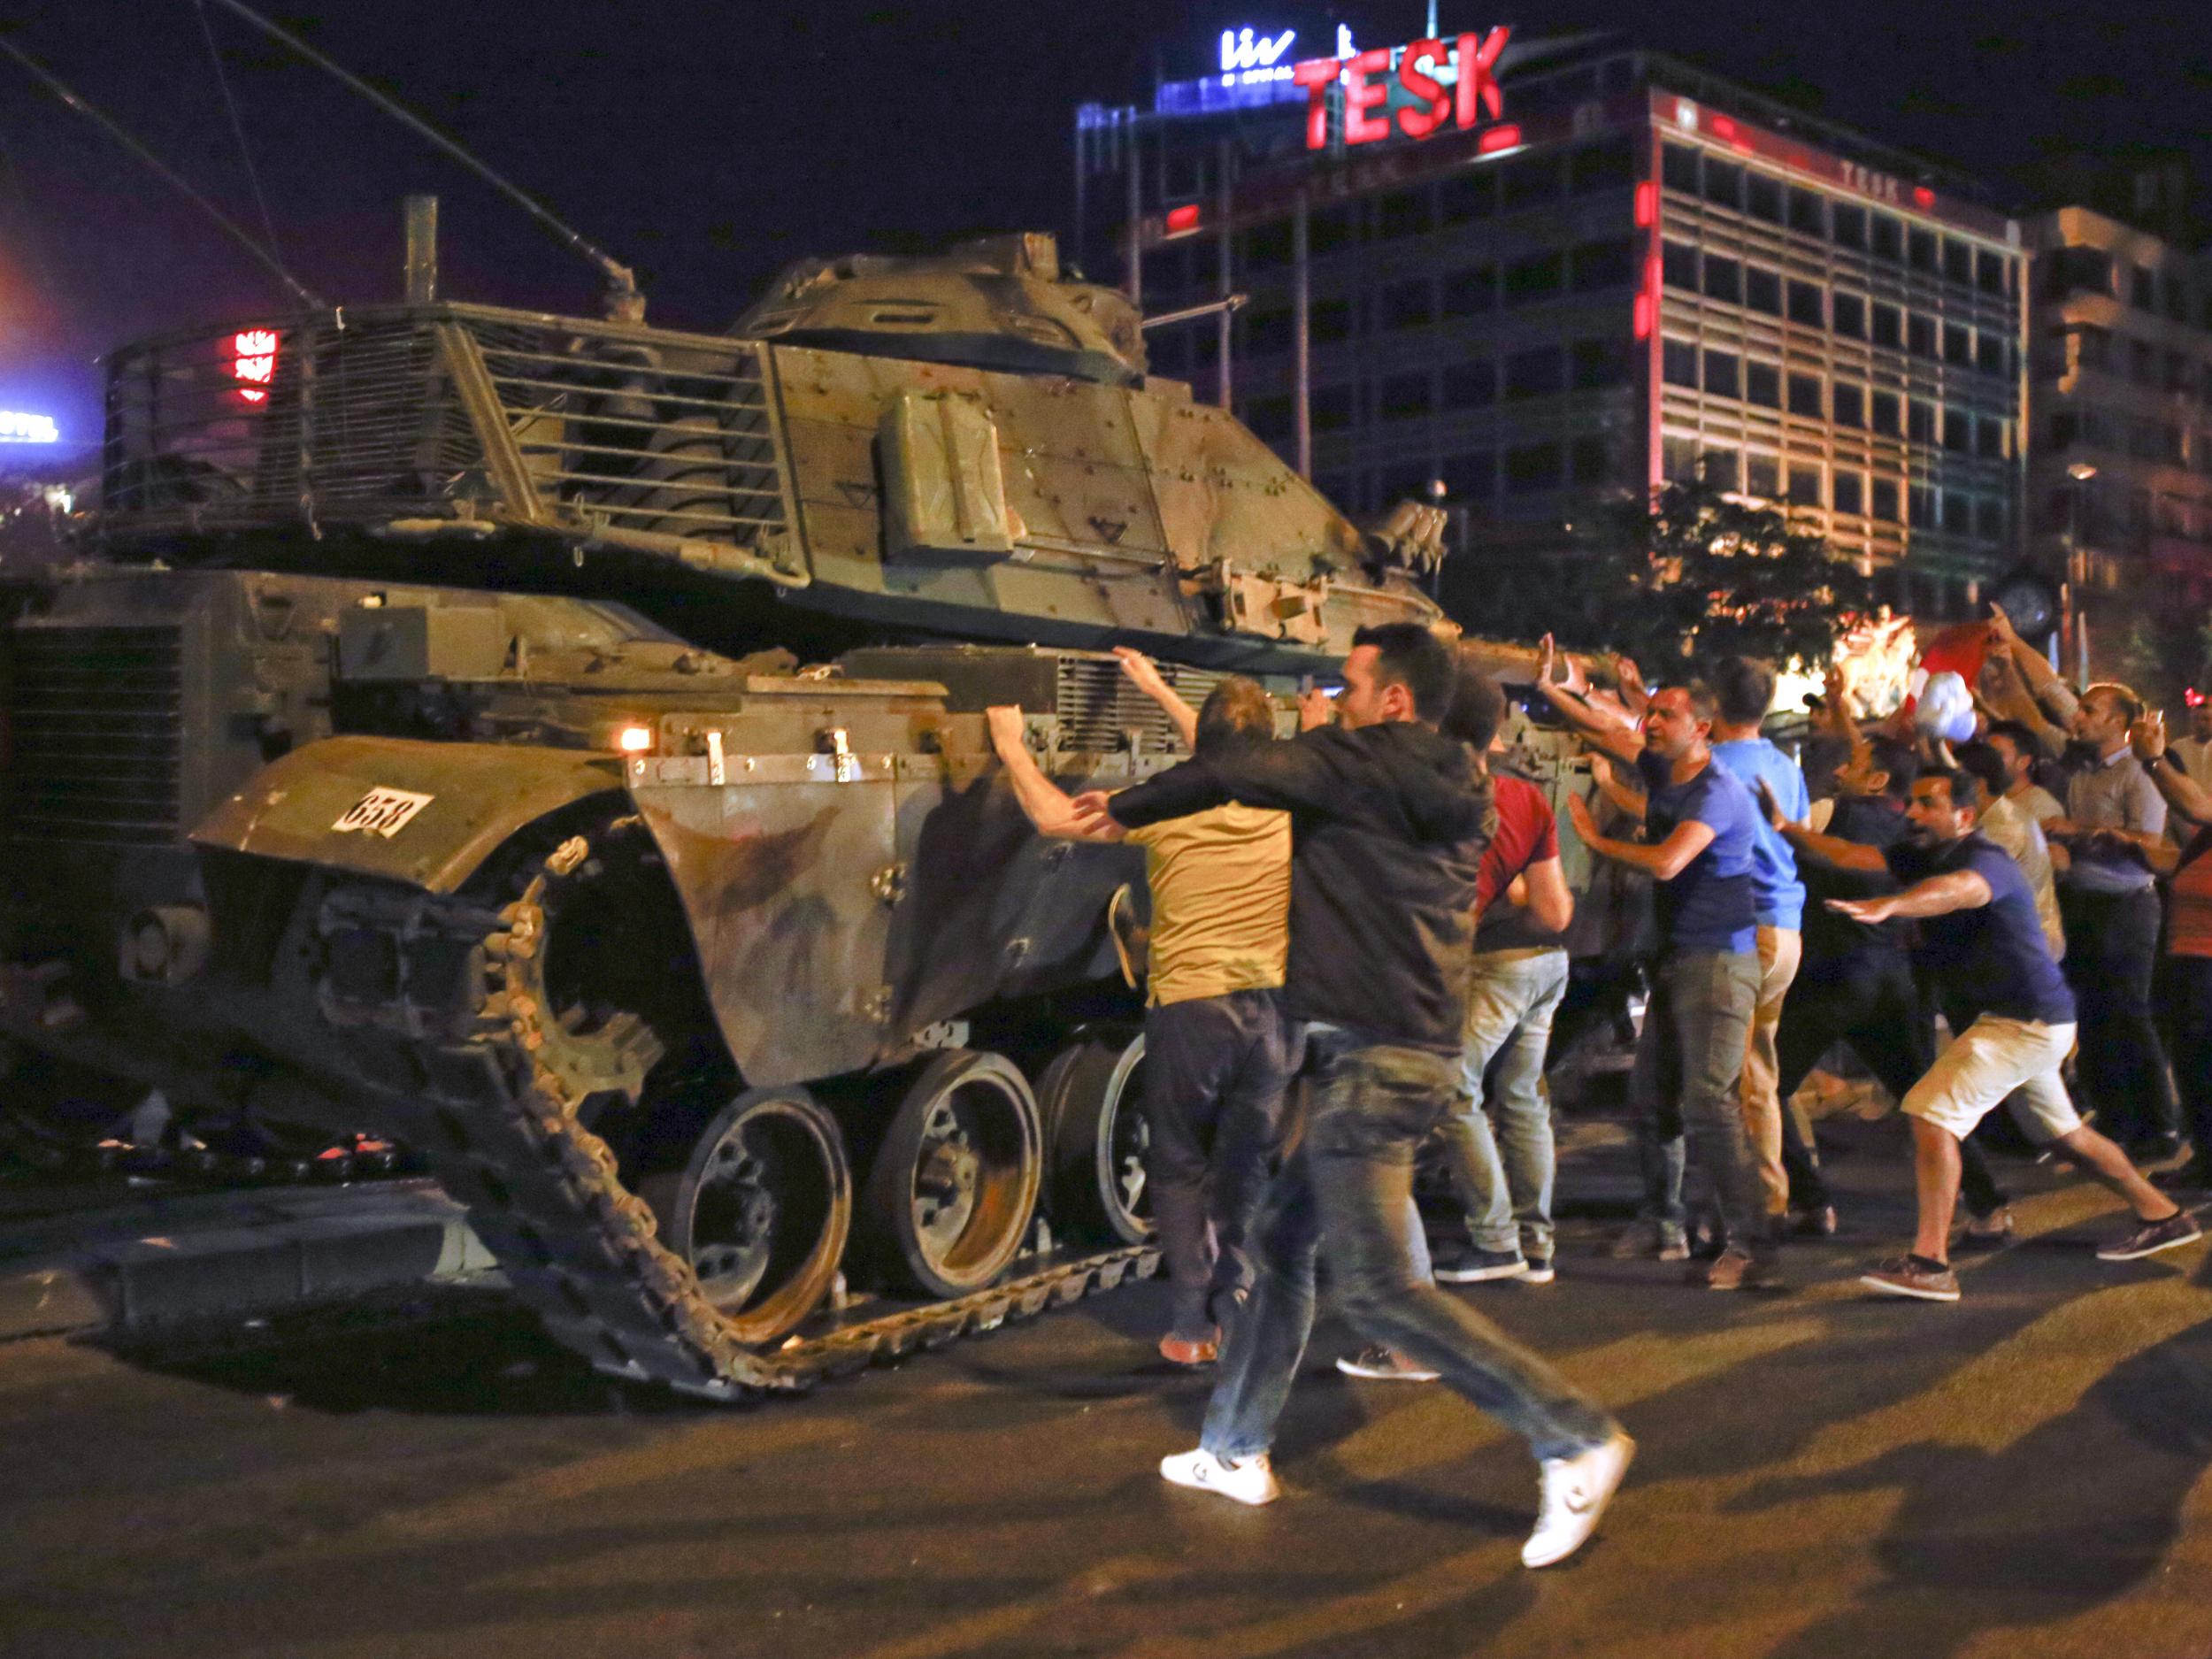 Protesters face off against a tank on the streets of Ankara during the night of the failed coup last July